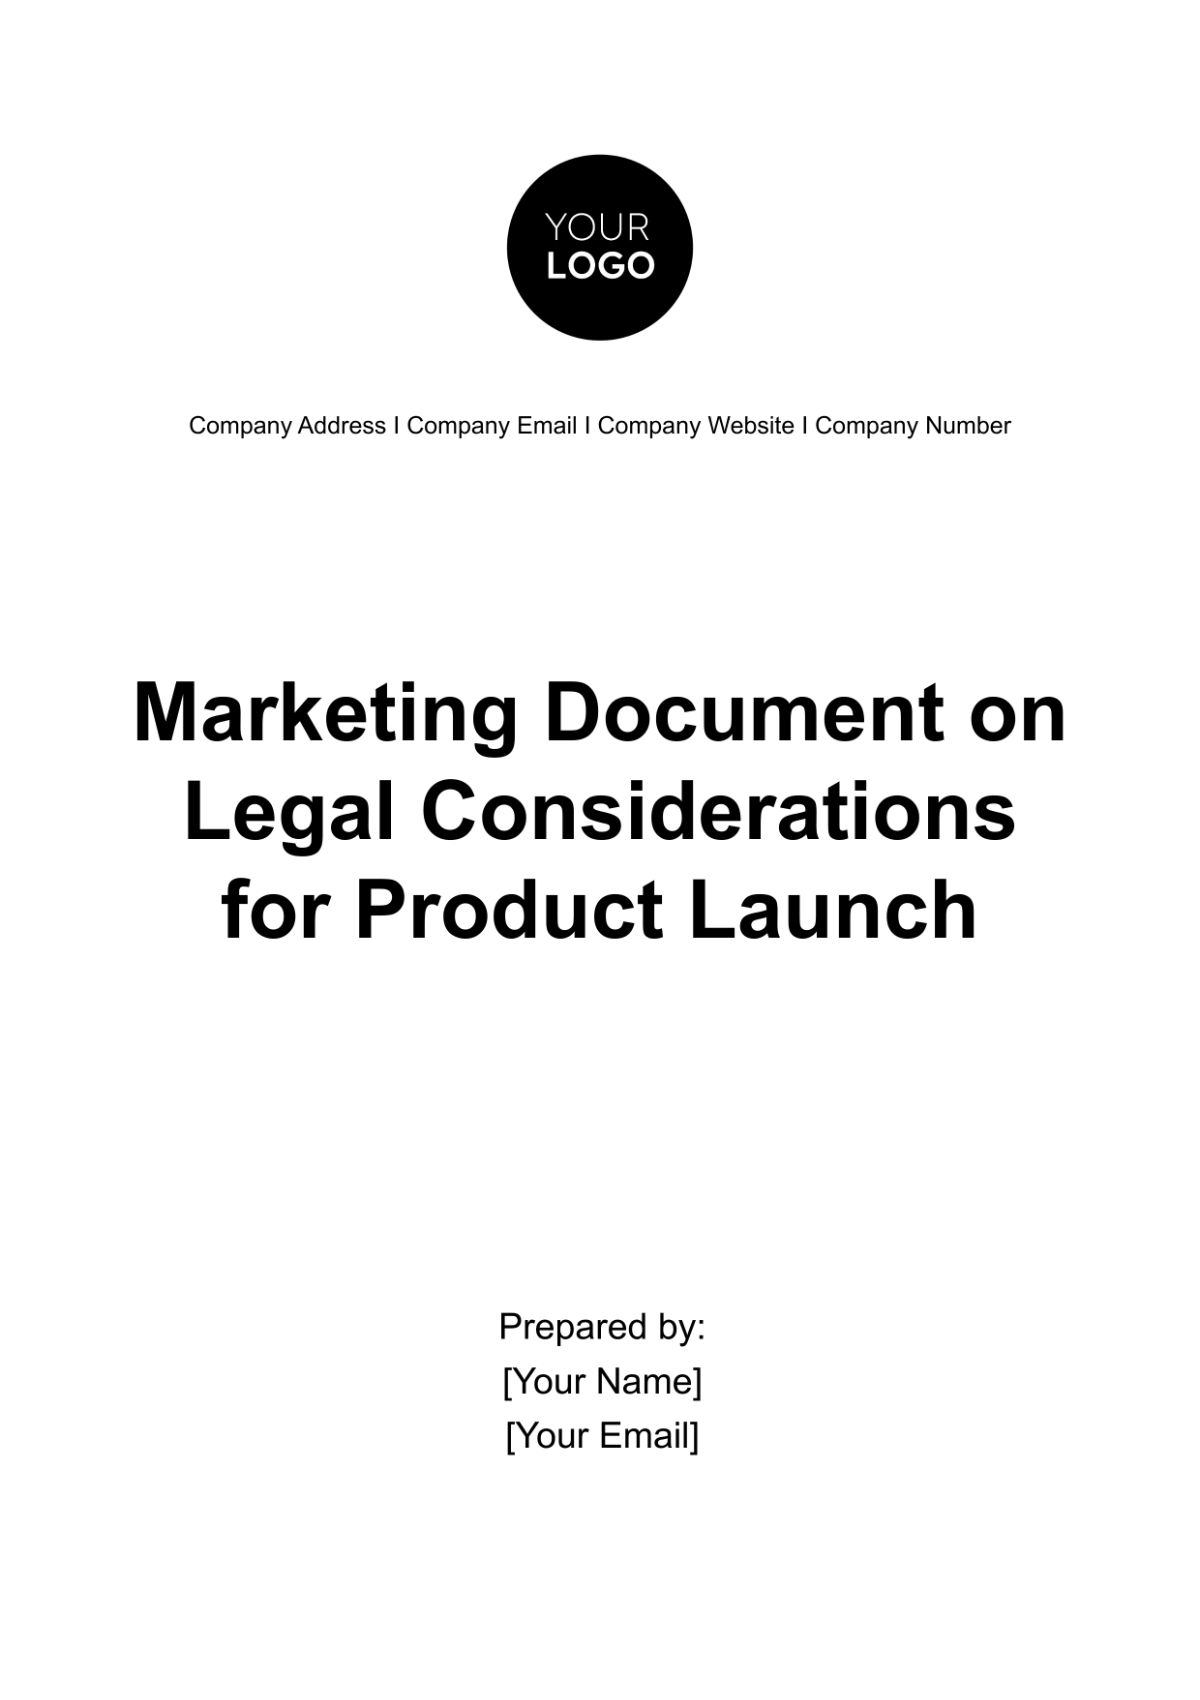 Marketing Document on Legal Considerations for Product Launch Template